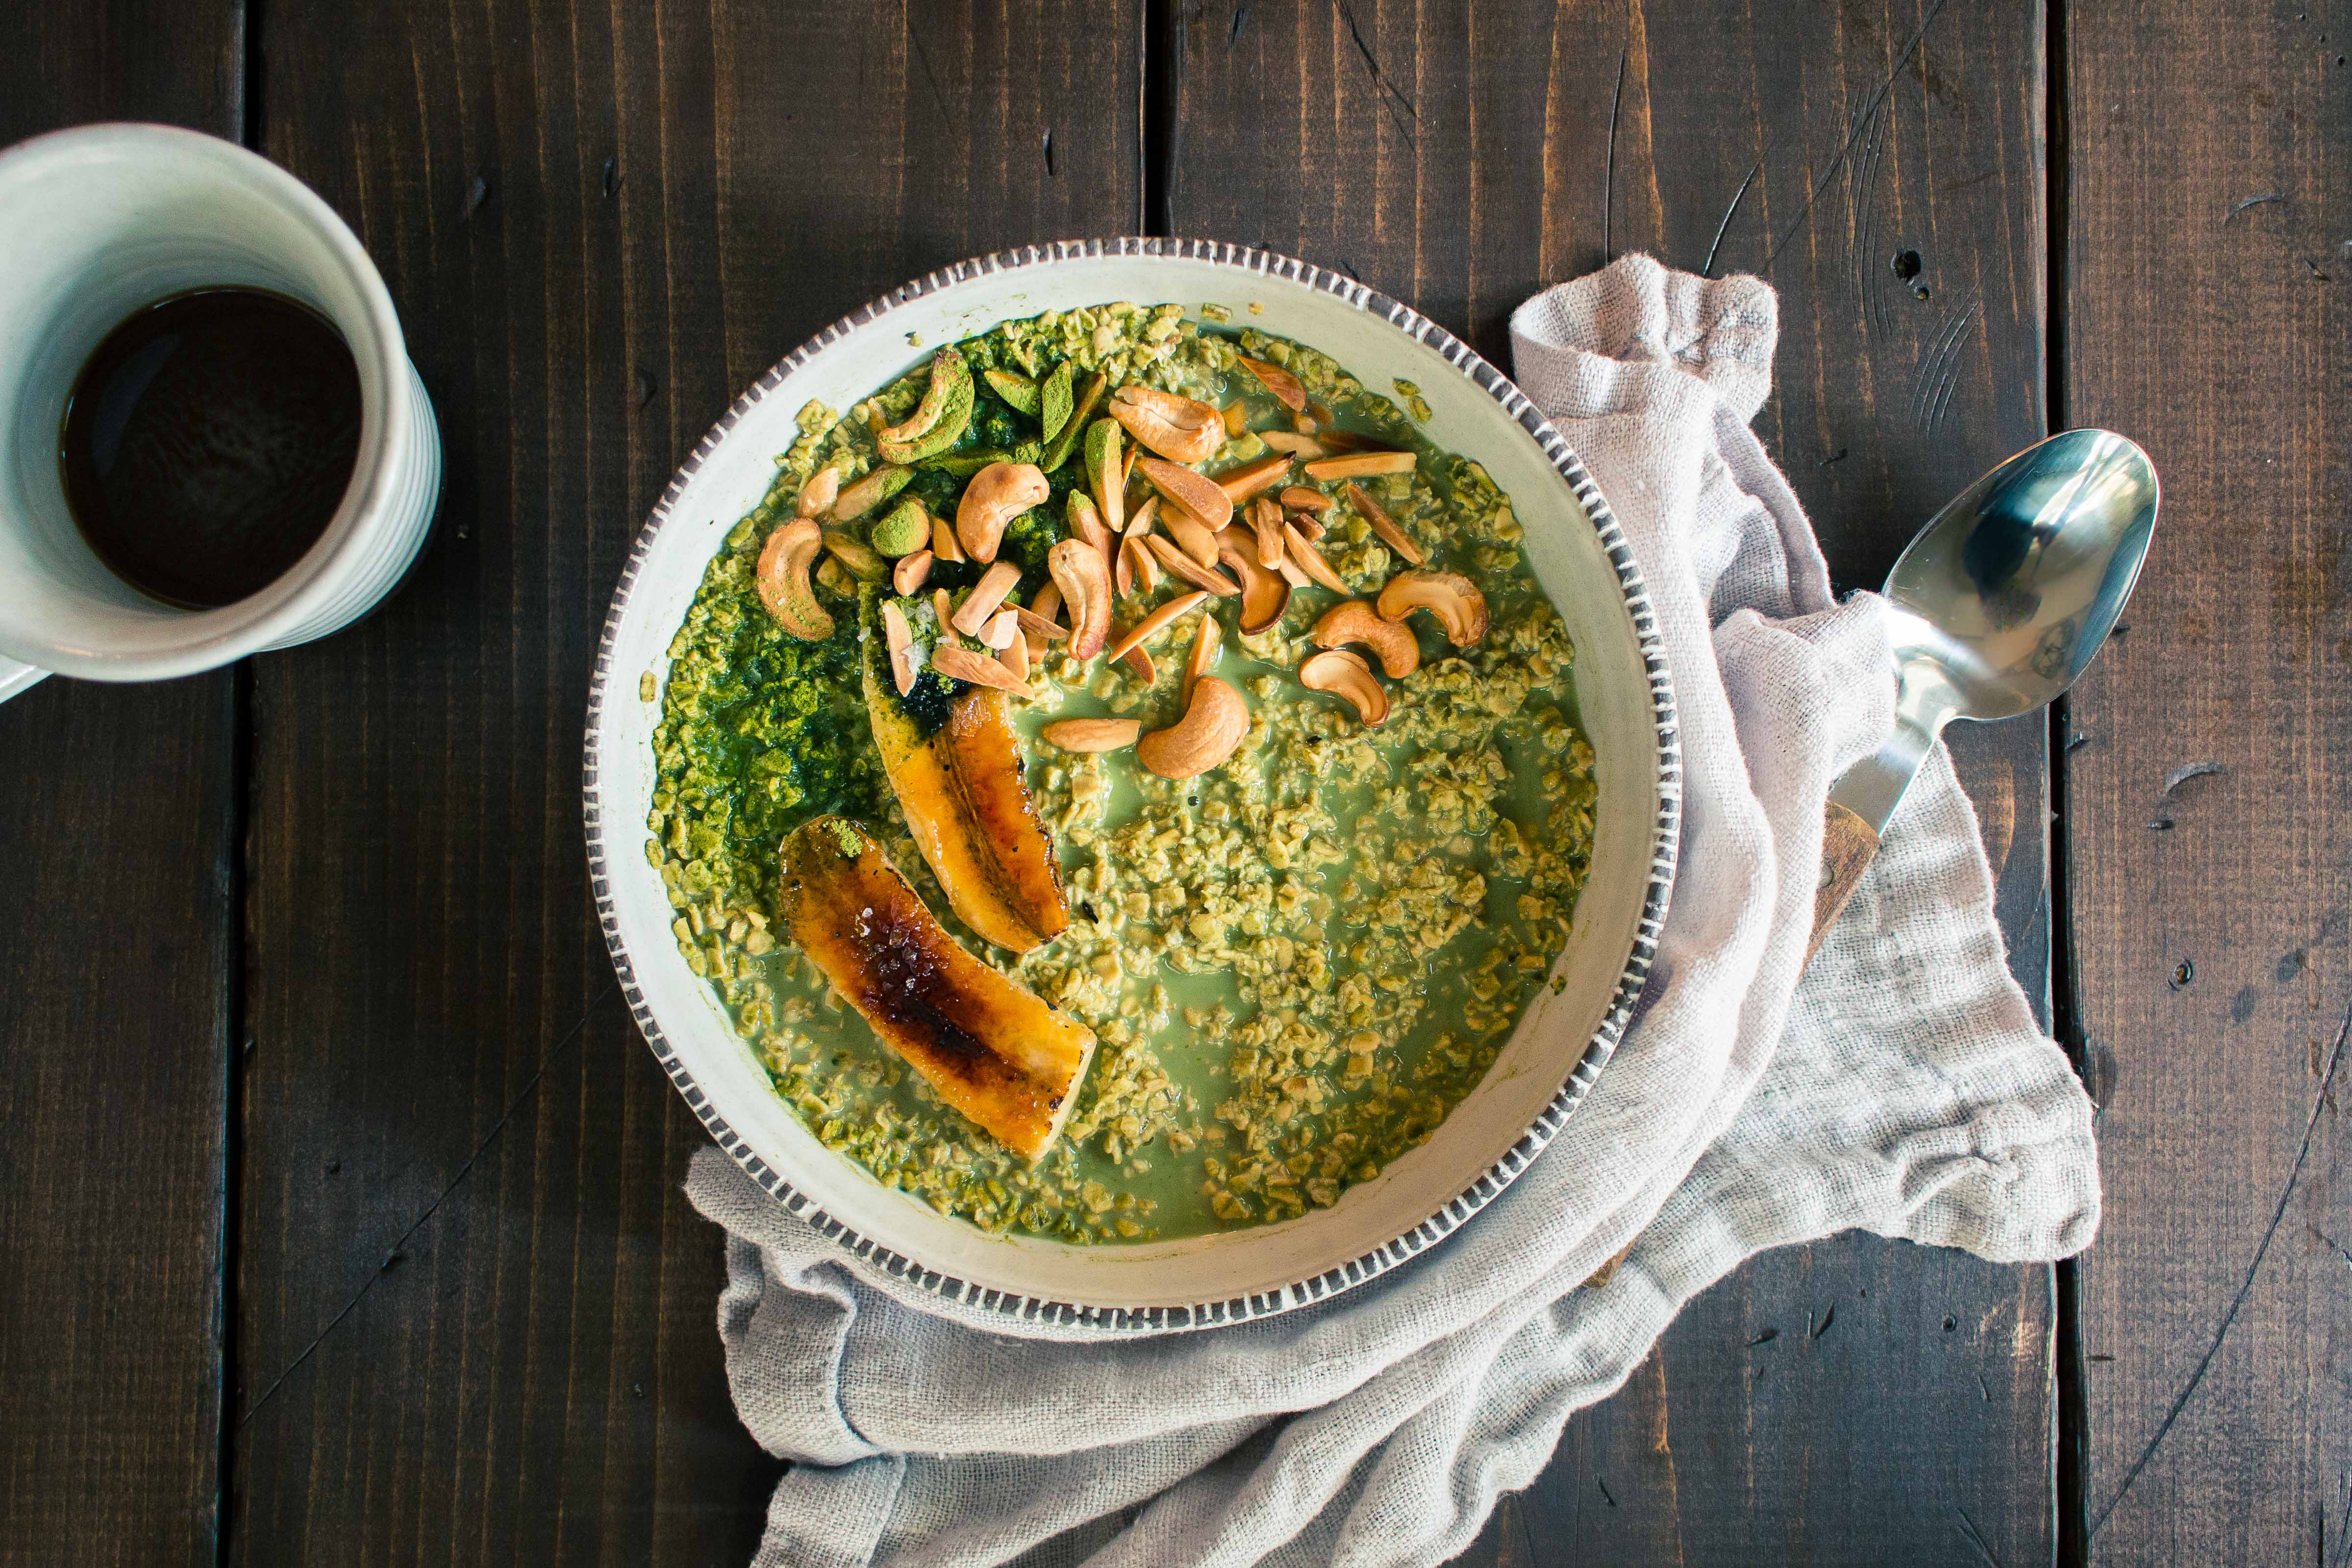 Dirty Matcha Latte Overnight Oats | Recipe from I Will Not Eat Oysters